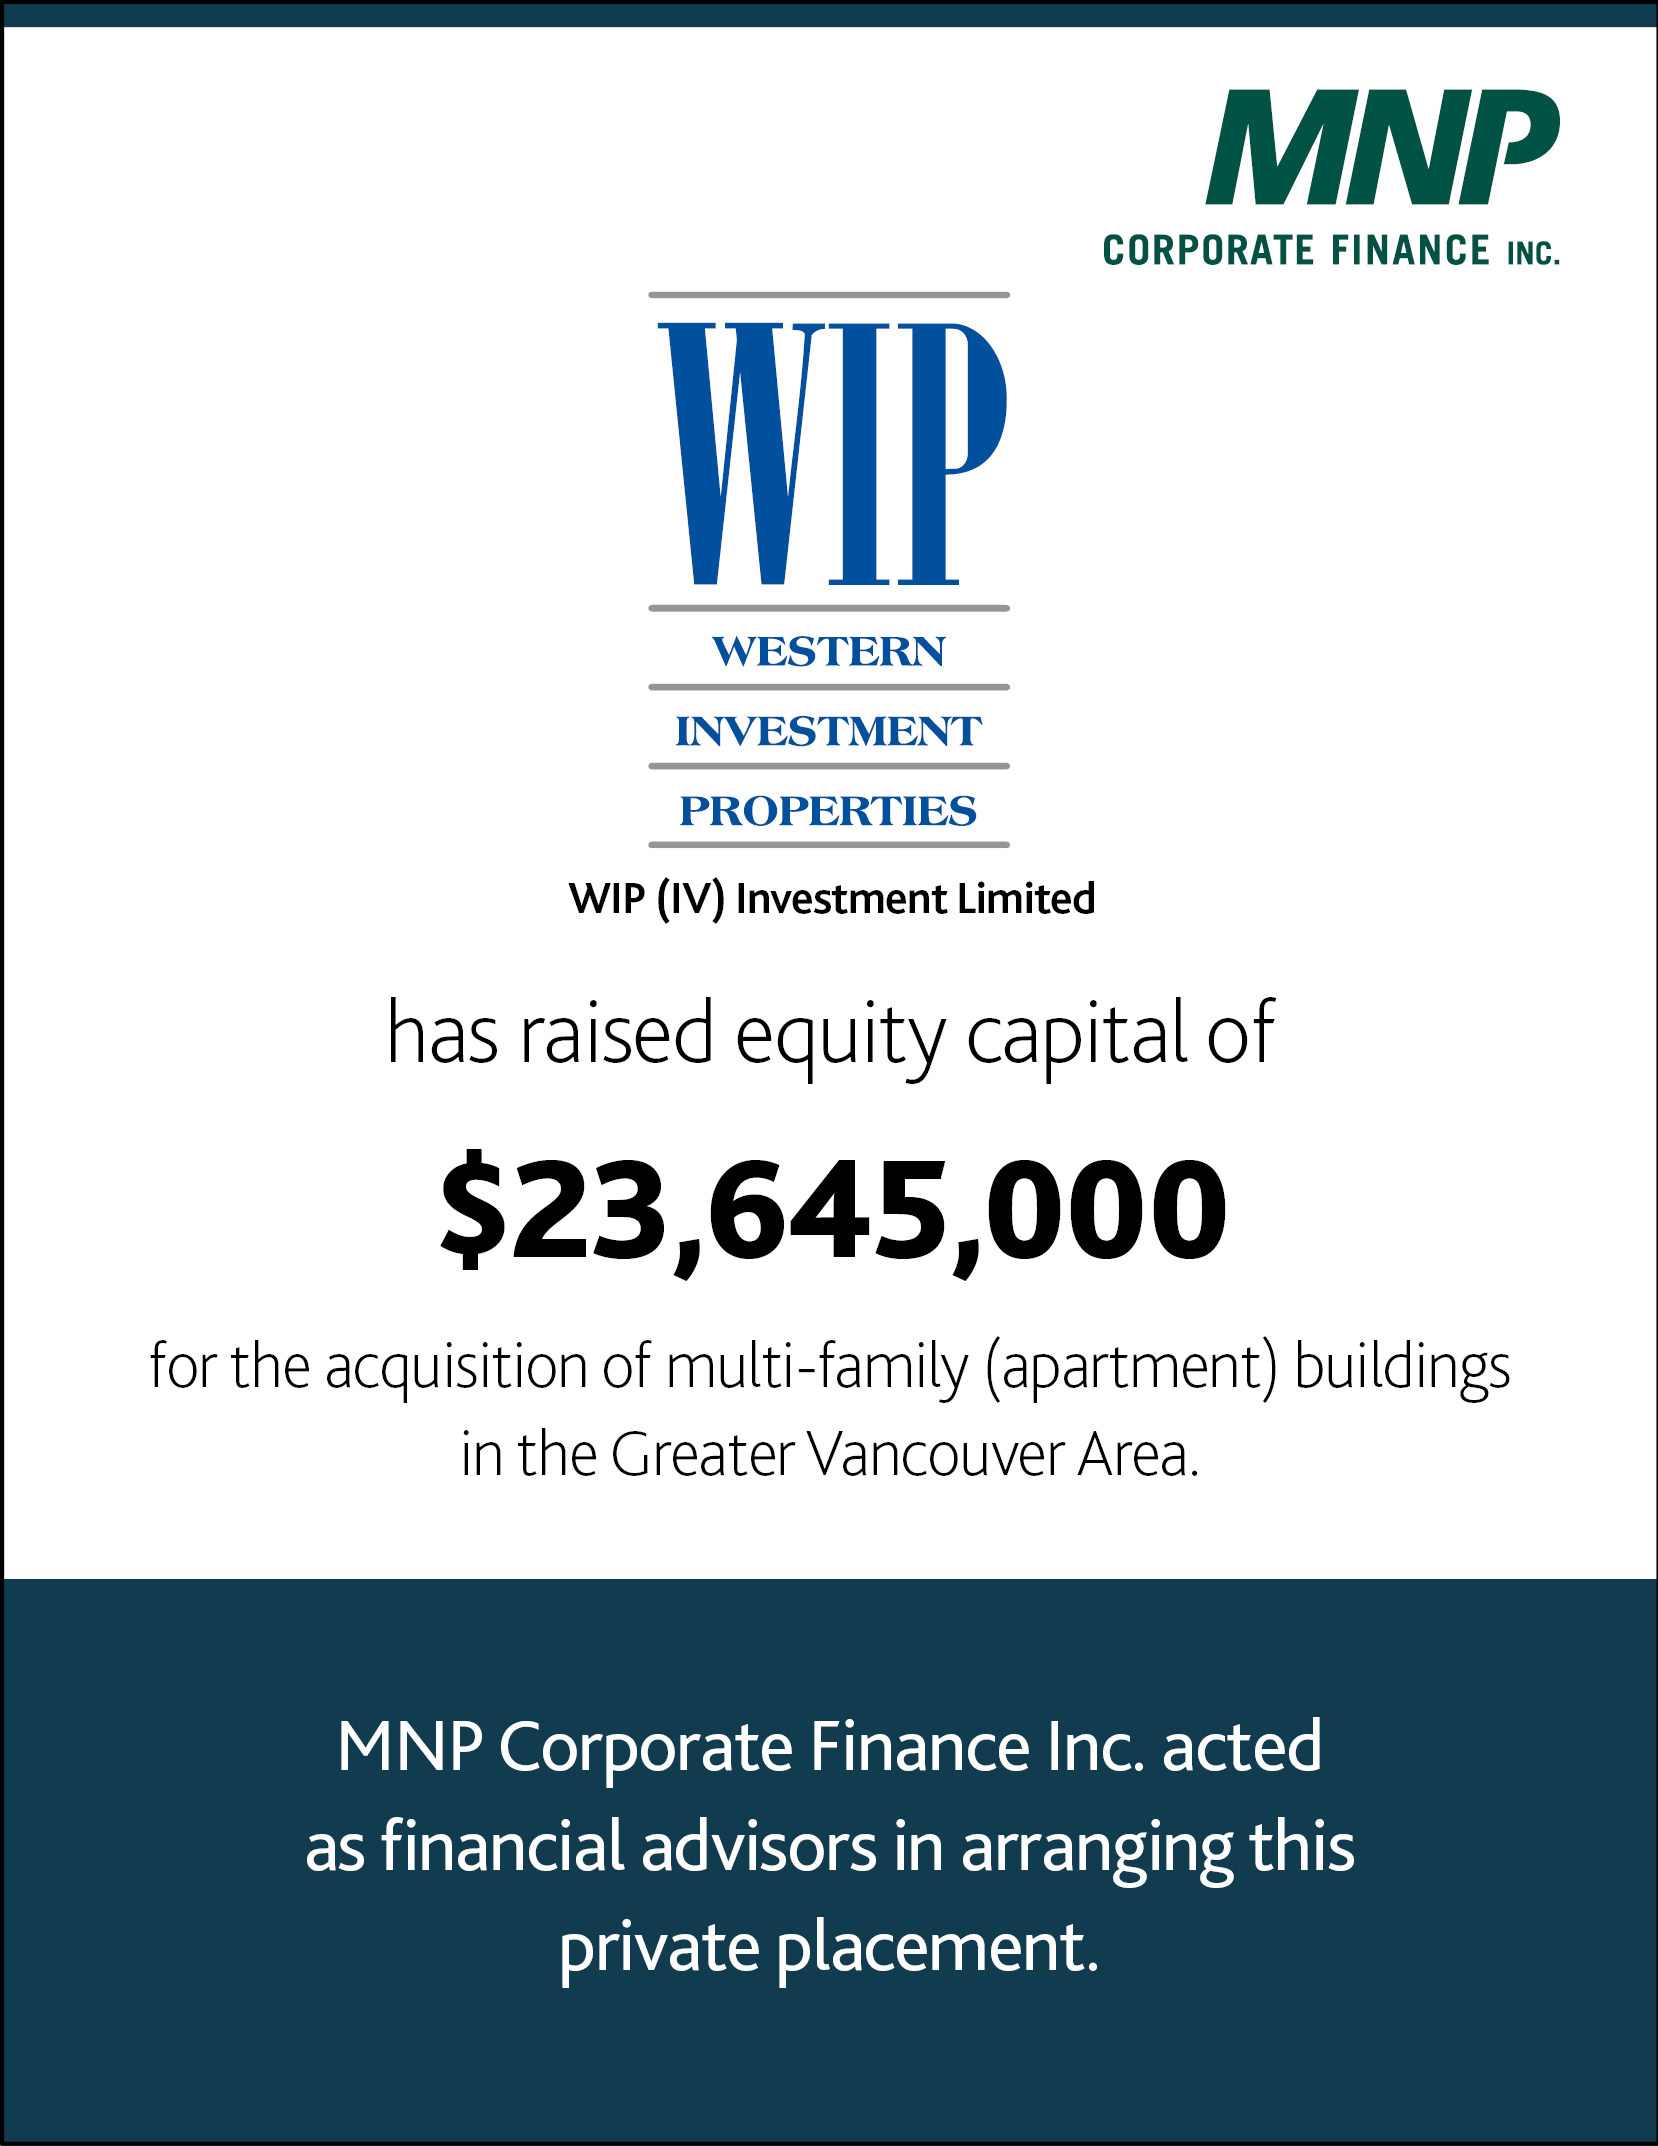 WIP (IV) Investment Limited Partnership has raised equity capital of $23,645,000 for the acquisition of multi-family (apartment) buildings in the Greater Vancouver Area.